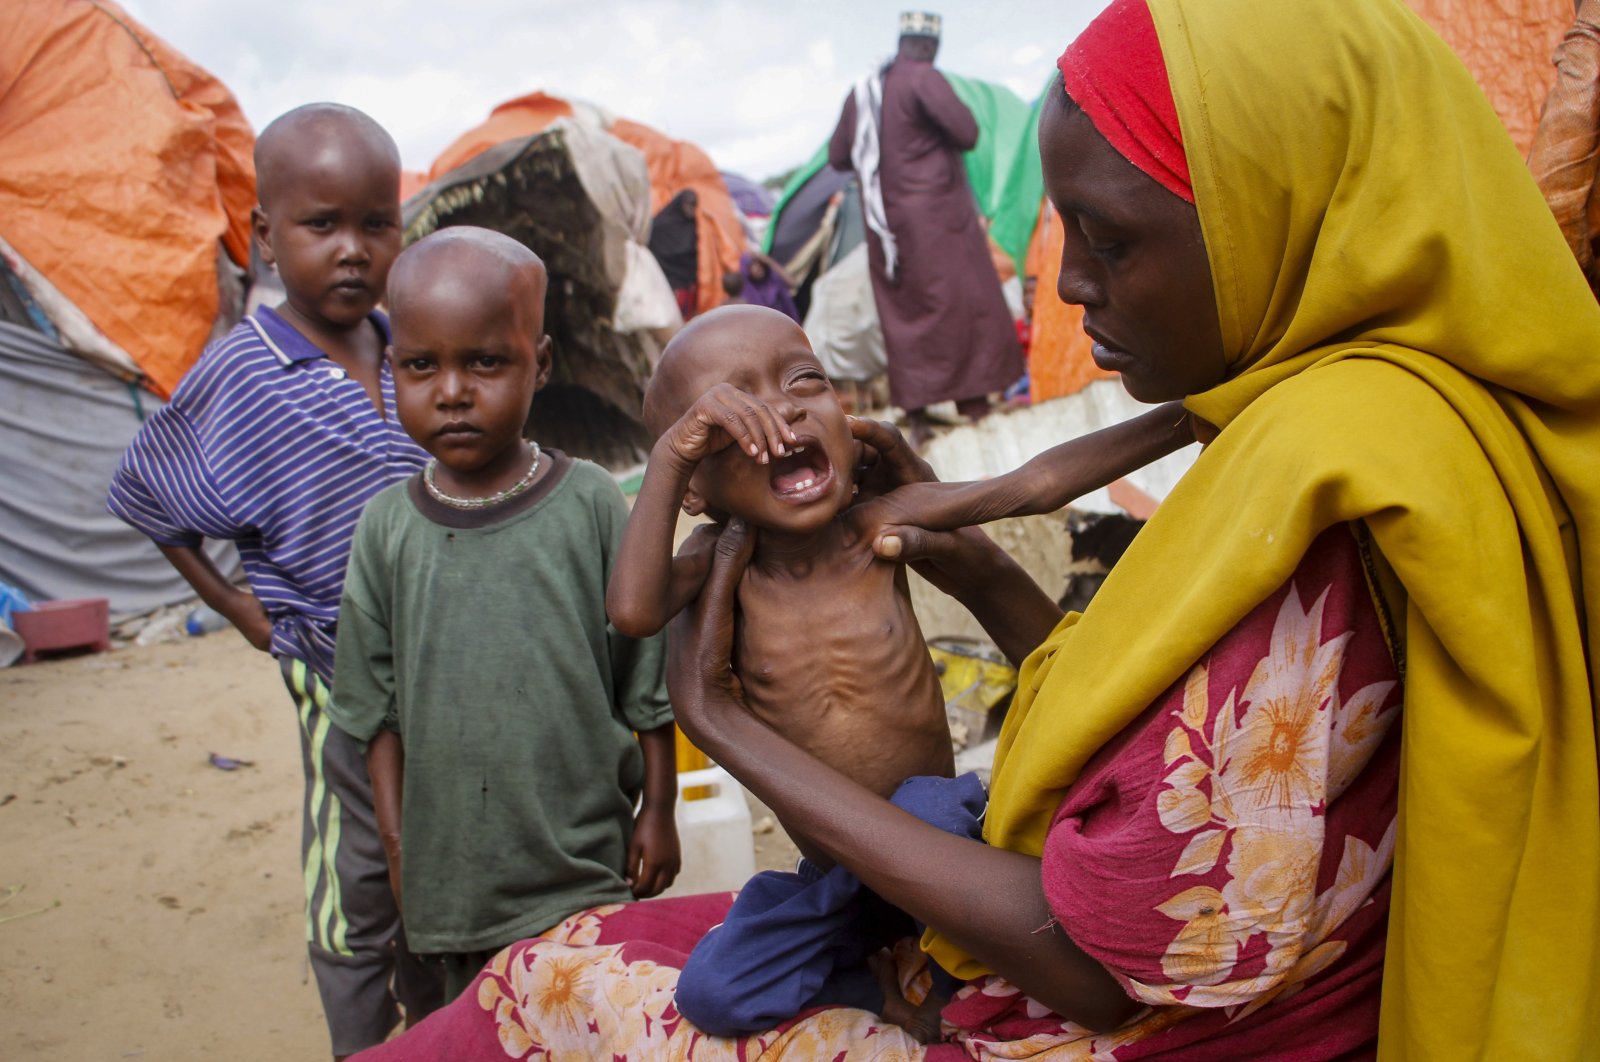 Maryan Madey, who fled the drought-stricken Lower Shabelle region, holds her malnourished daughter Deka Ali, 1, at a camp for the displaced on the outskirts of Mogadishu, Somalia, Sept. 3, 2022. (AP Photo)